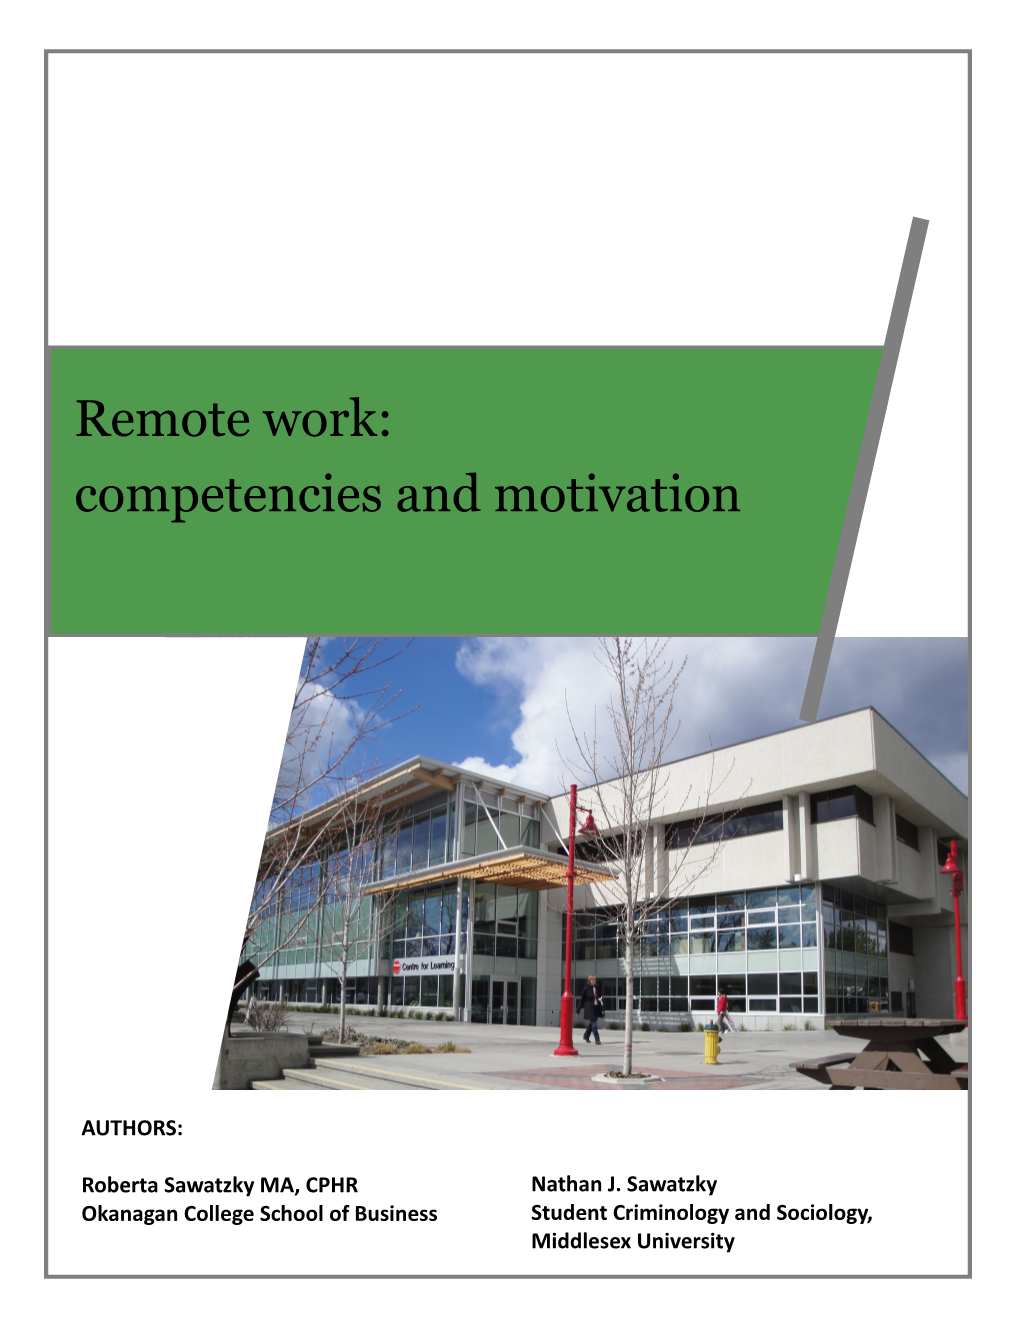 Remote Work: Competencies and Motivation